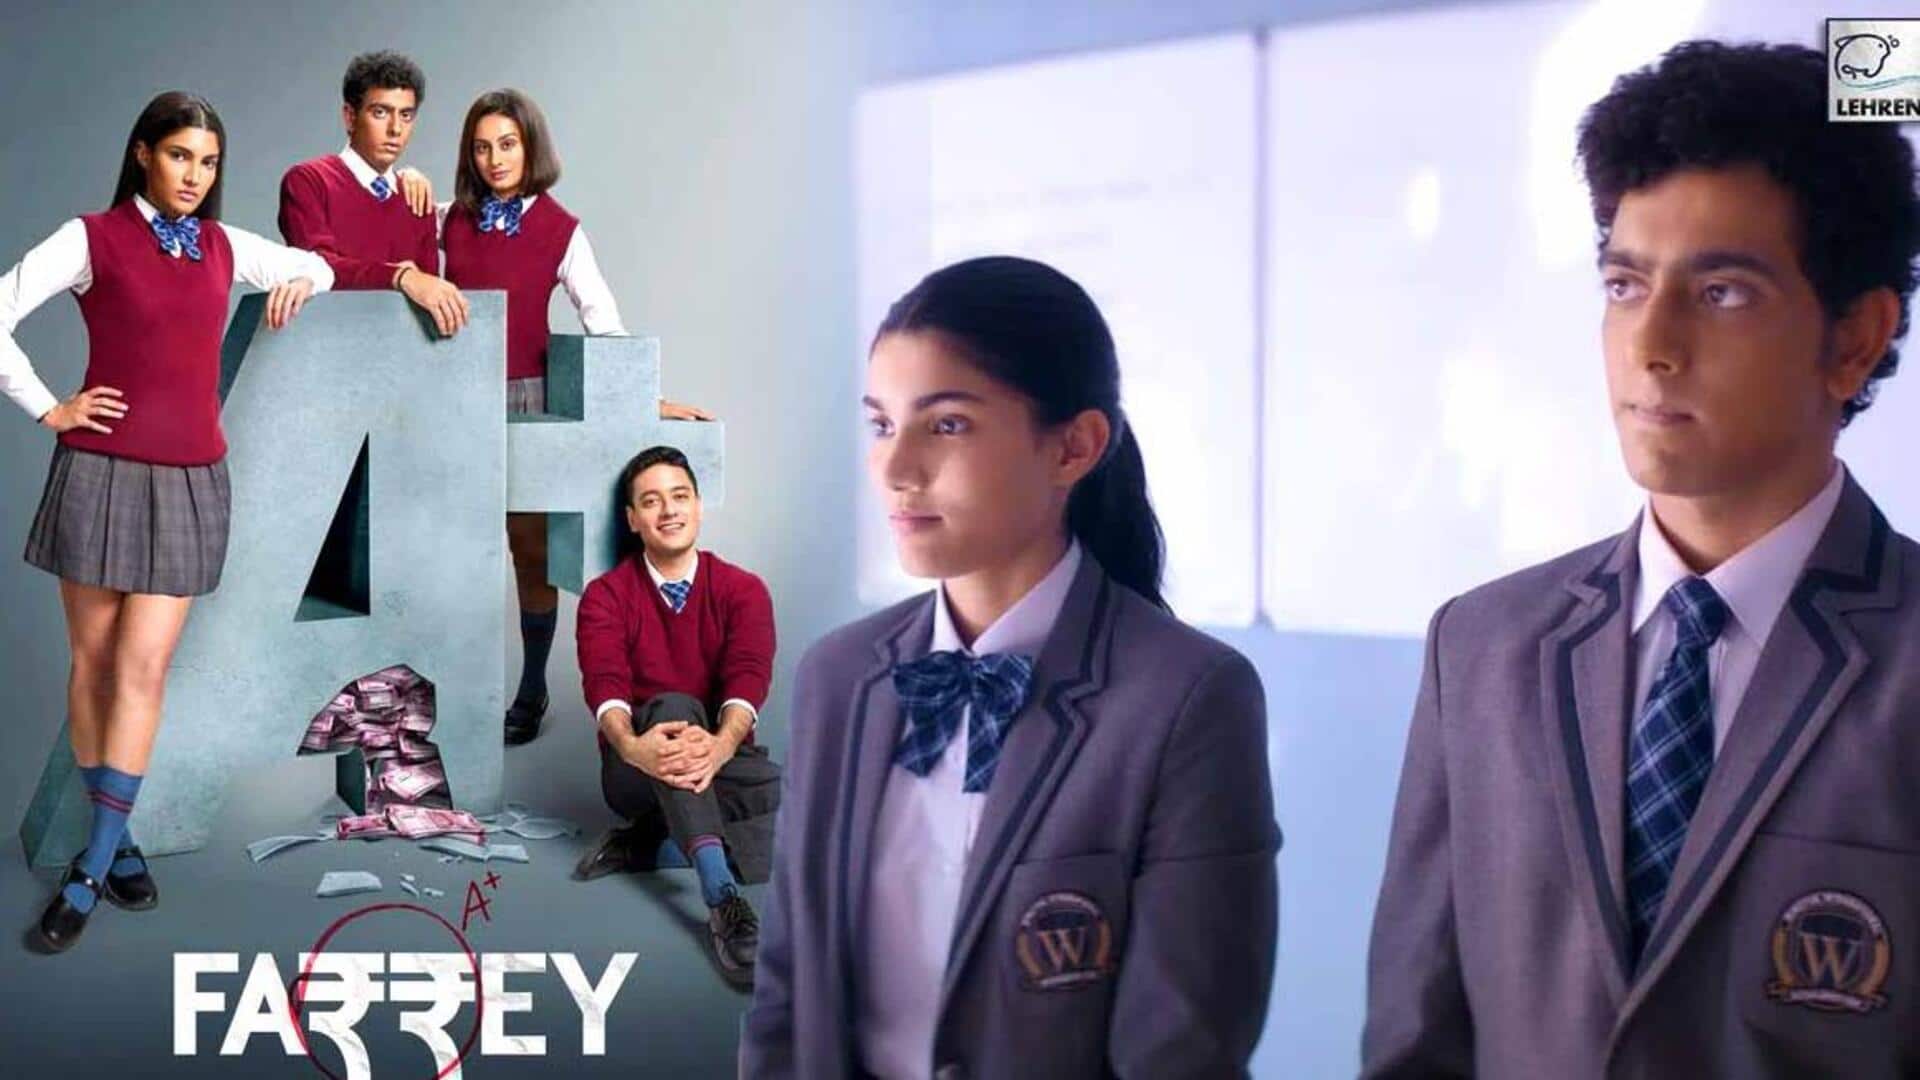 'Farrey' box office: Disastrous opening for Alizeh Agnihotri's debut